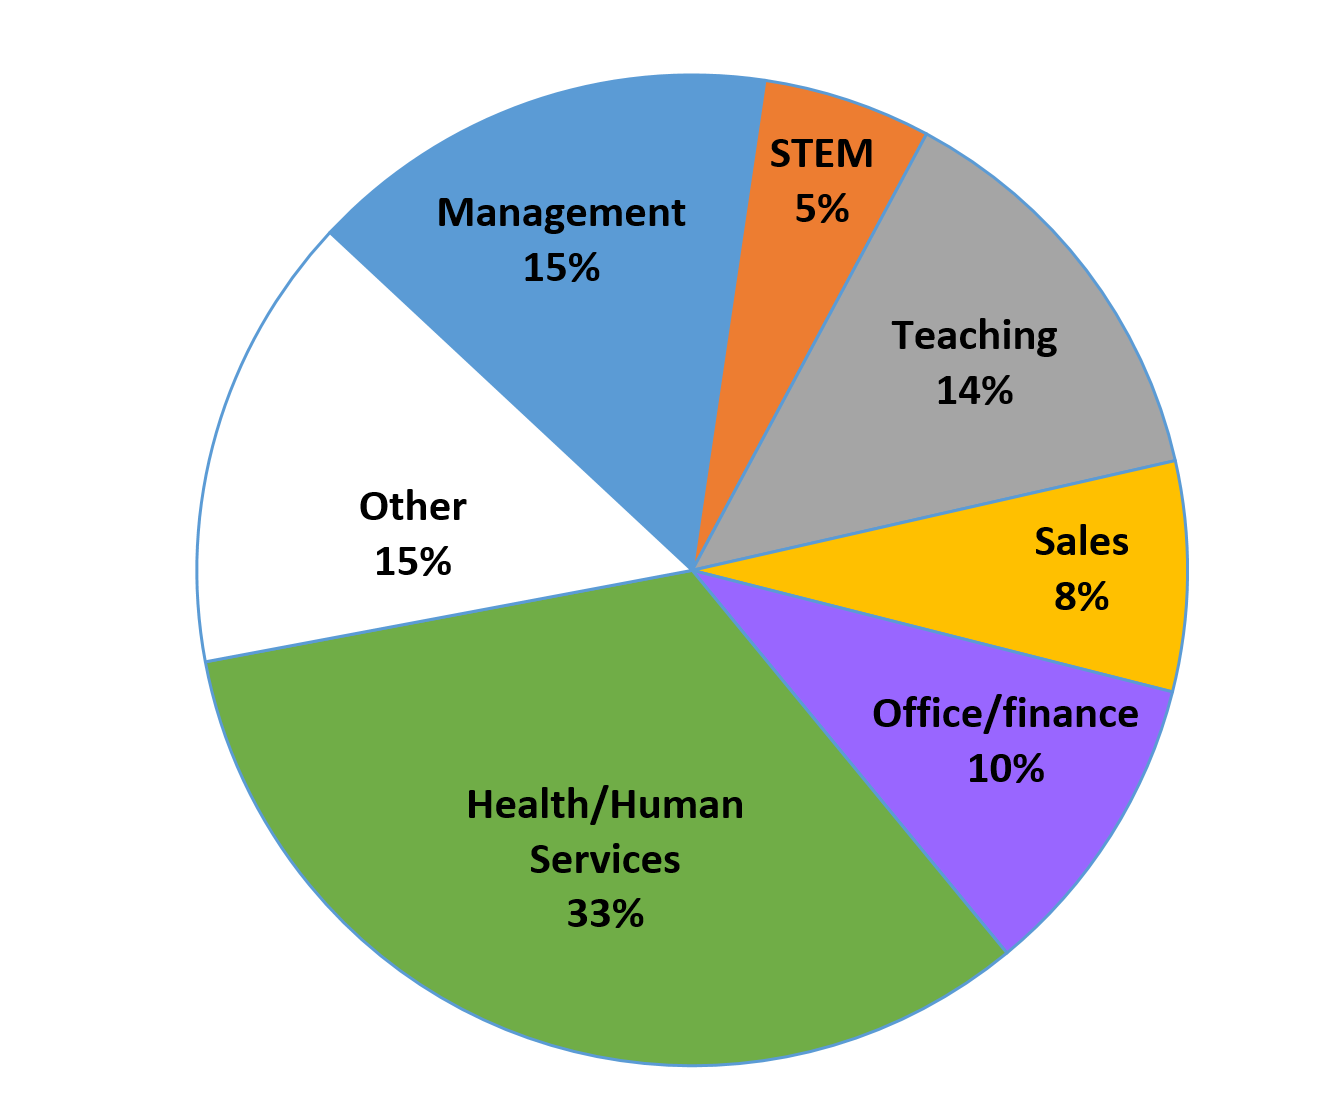 Pie chart divided into 7 segments. Health/Human services 33%; Other 15%; Management 15%, Teaching 14%, Office/finance 10%; Sales 8%; STEM 5%